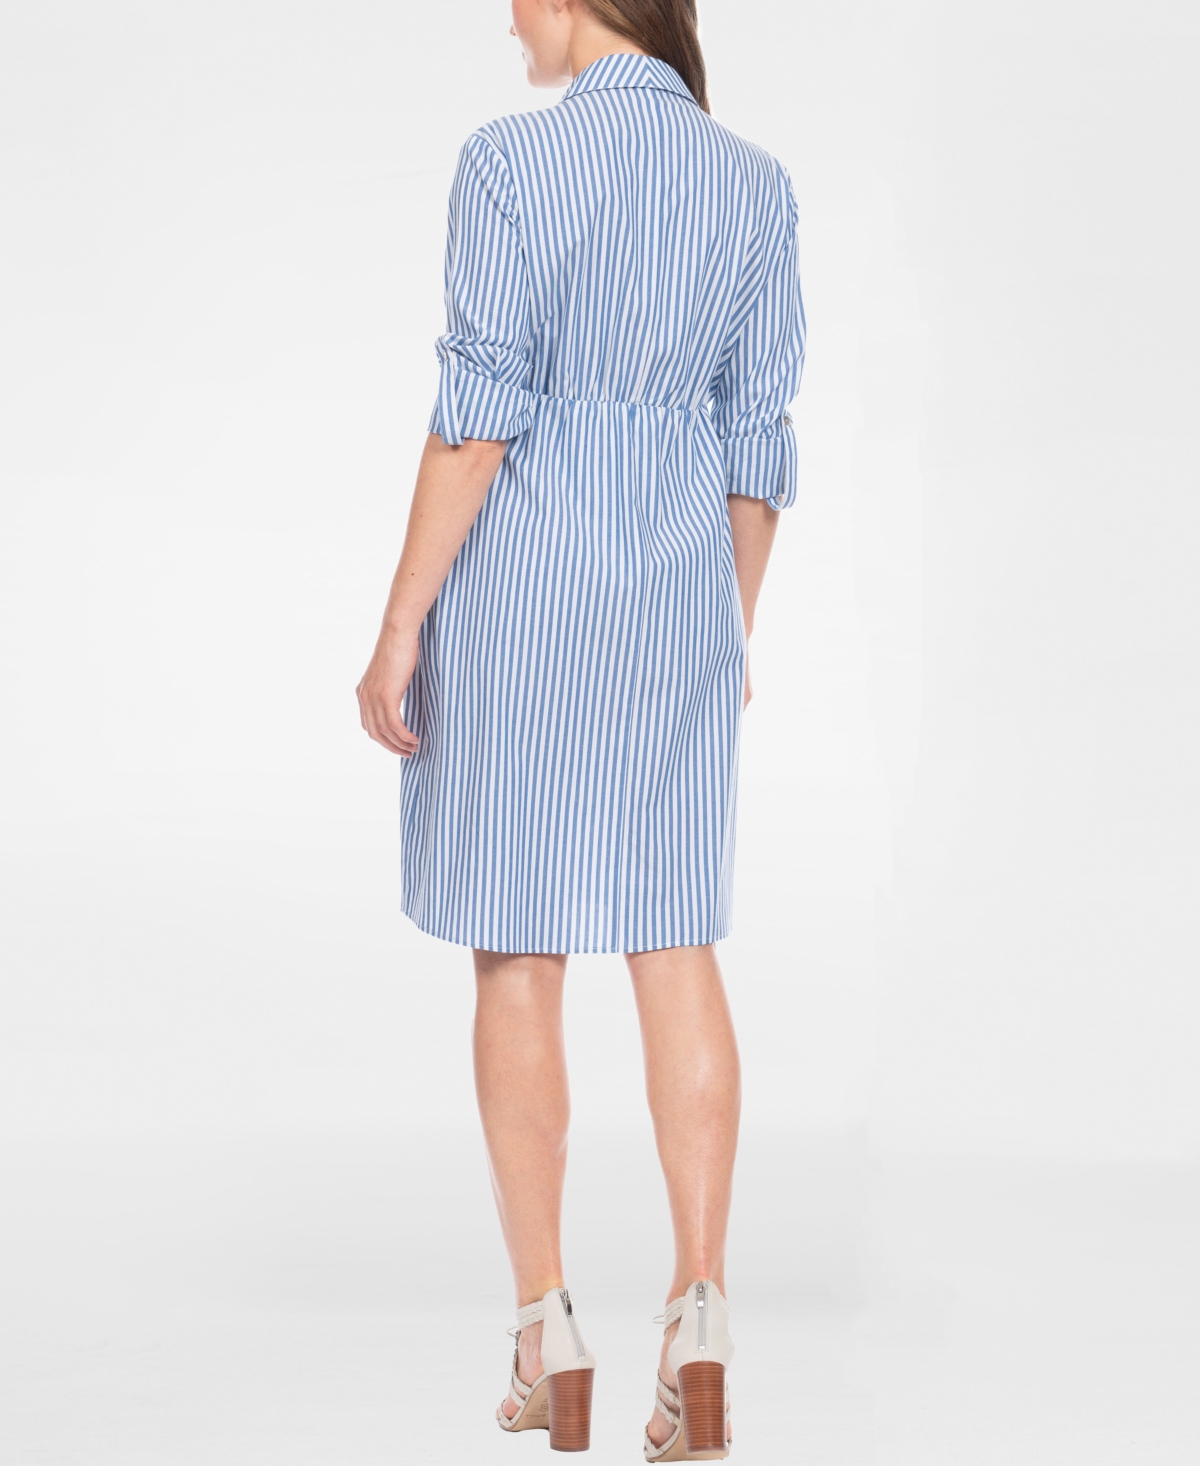 Shop Seraphine Women's Cotton And Lyocell Maternity And Nursing Shirt Dress In Blue Stripe